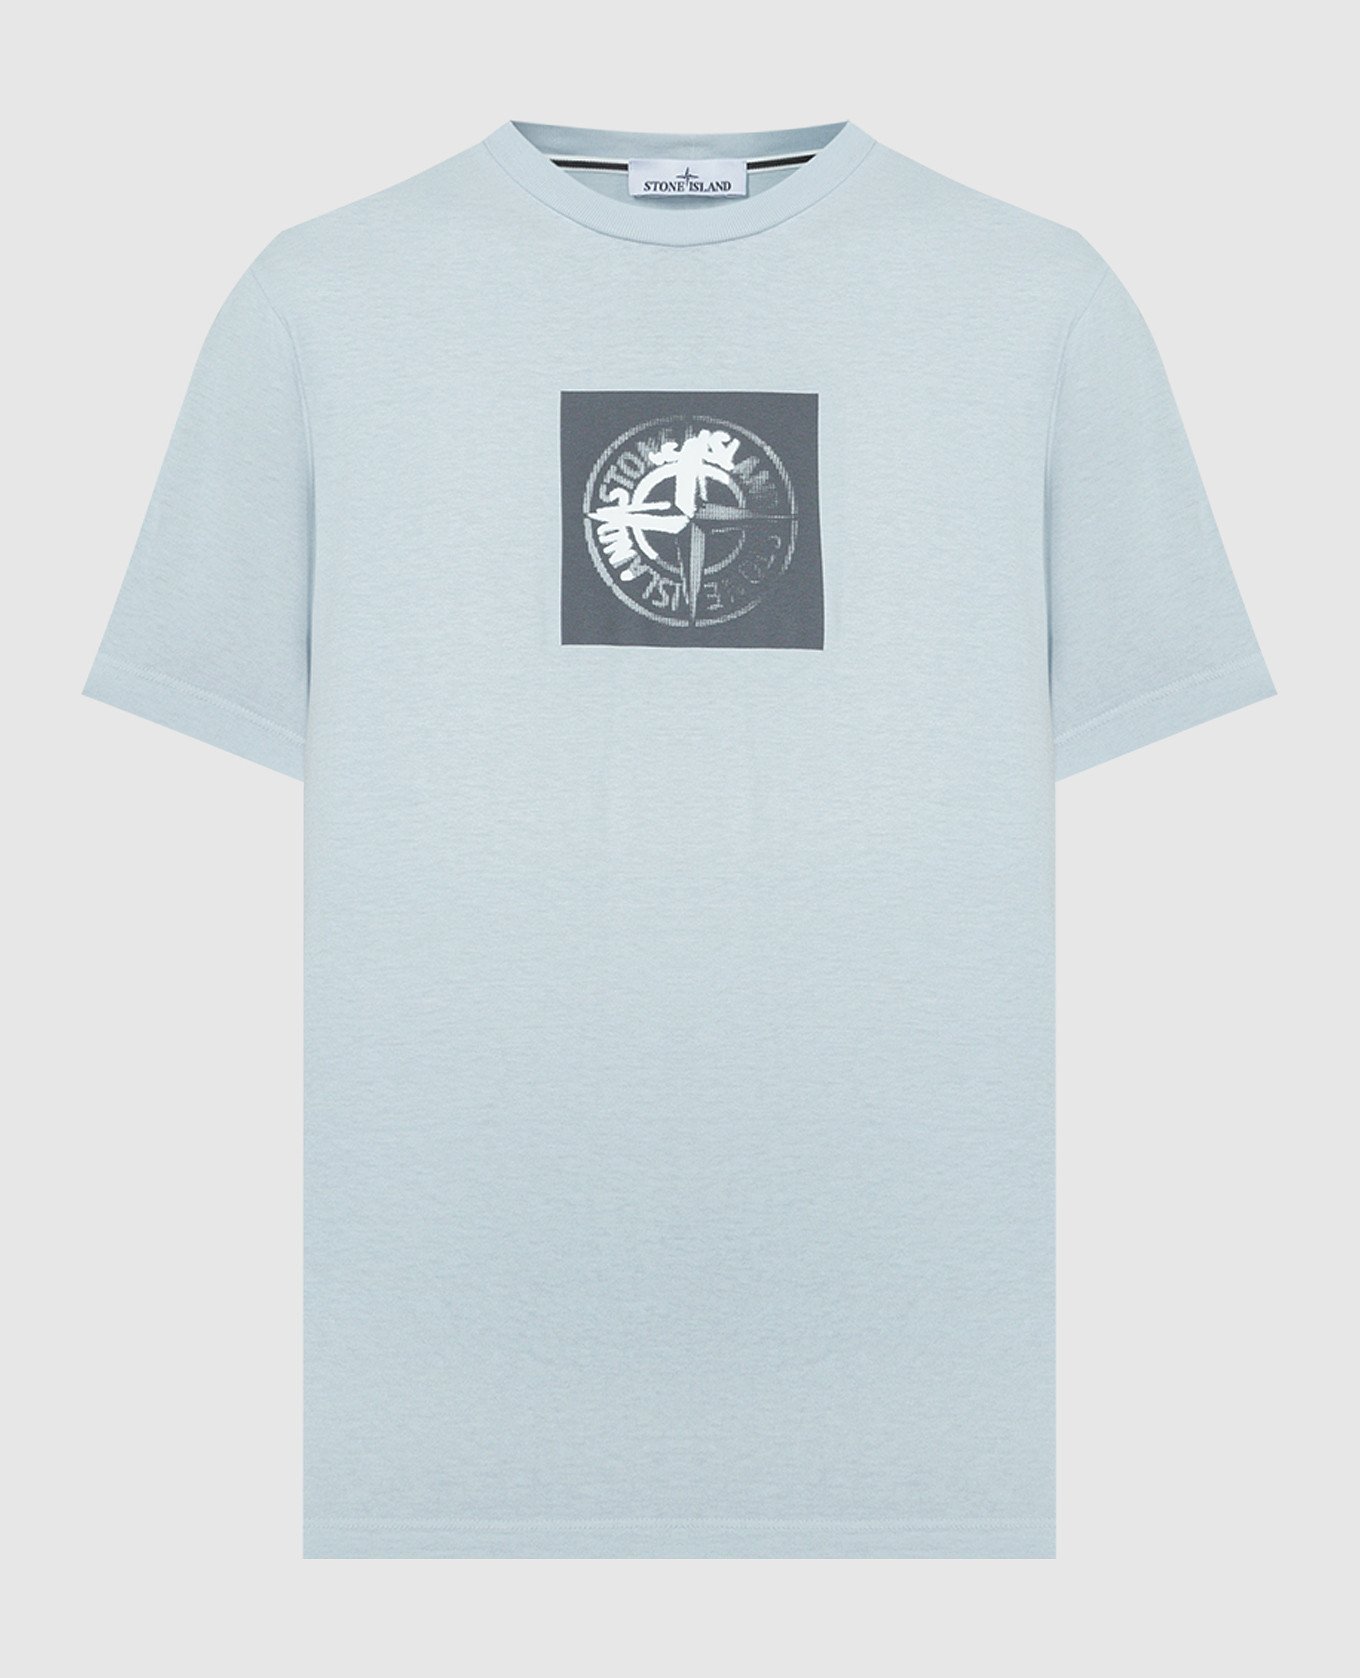 Blue t-shirt with Stamp One logo print